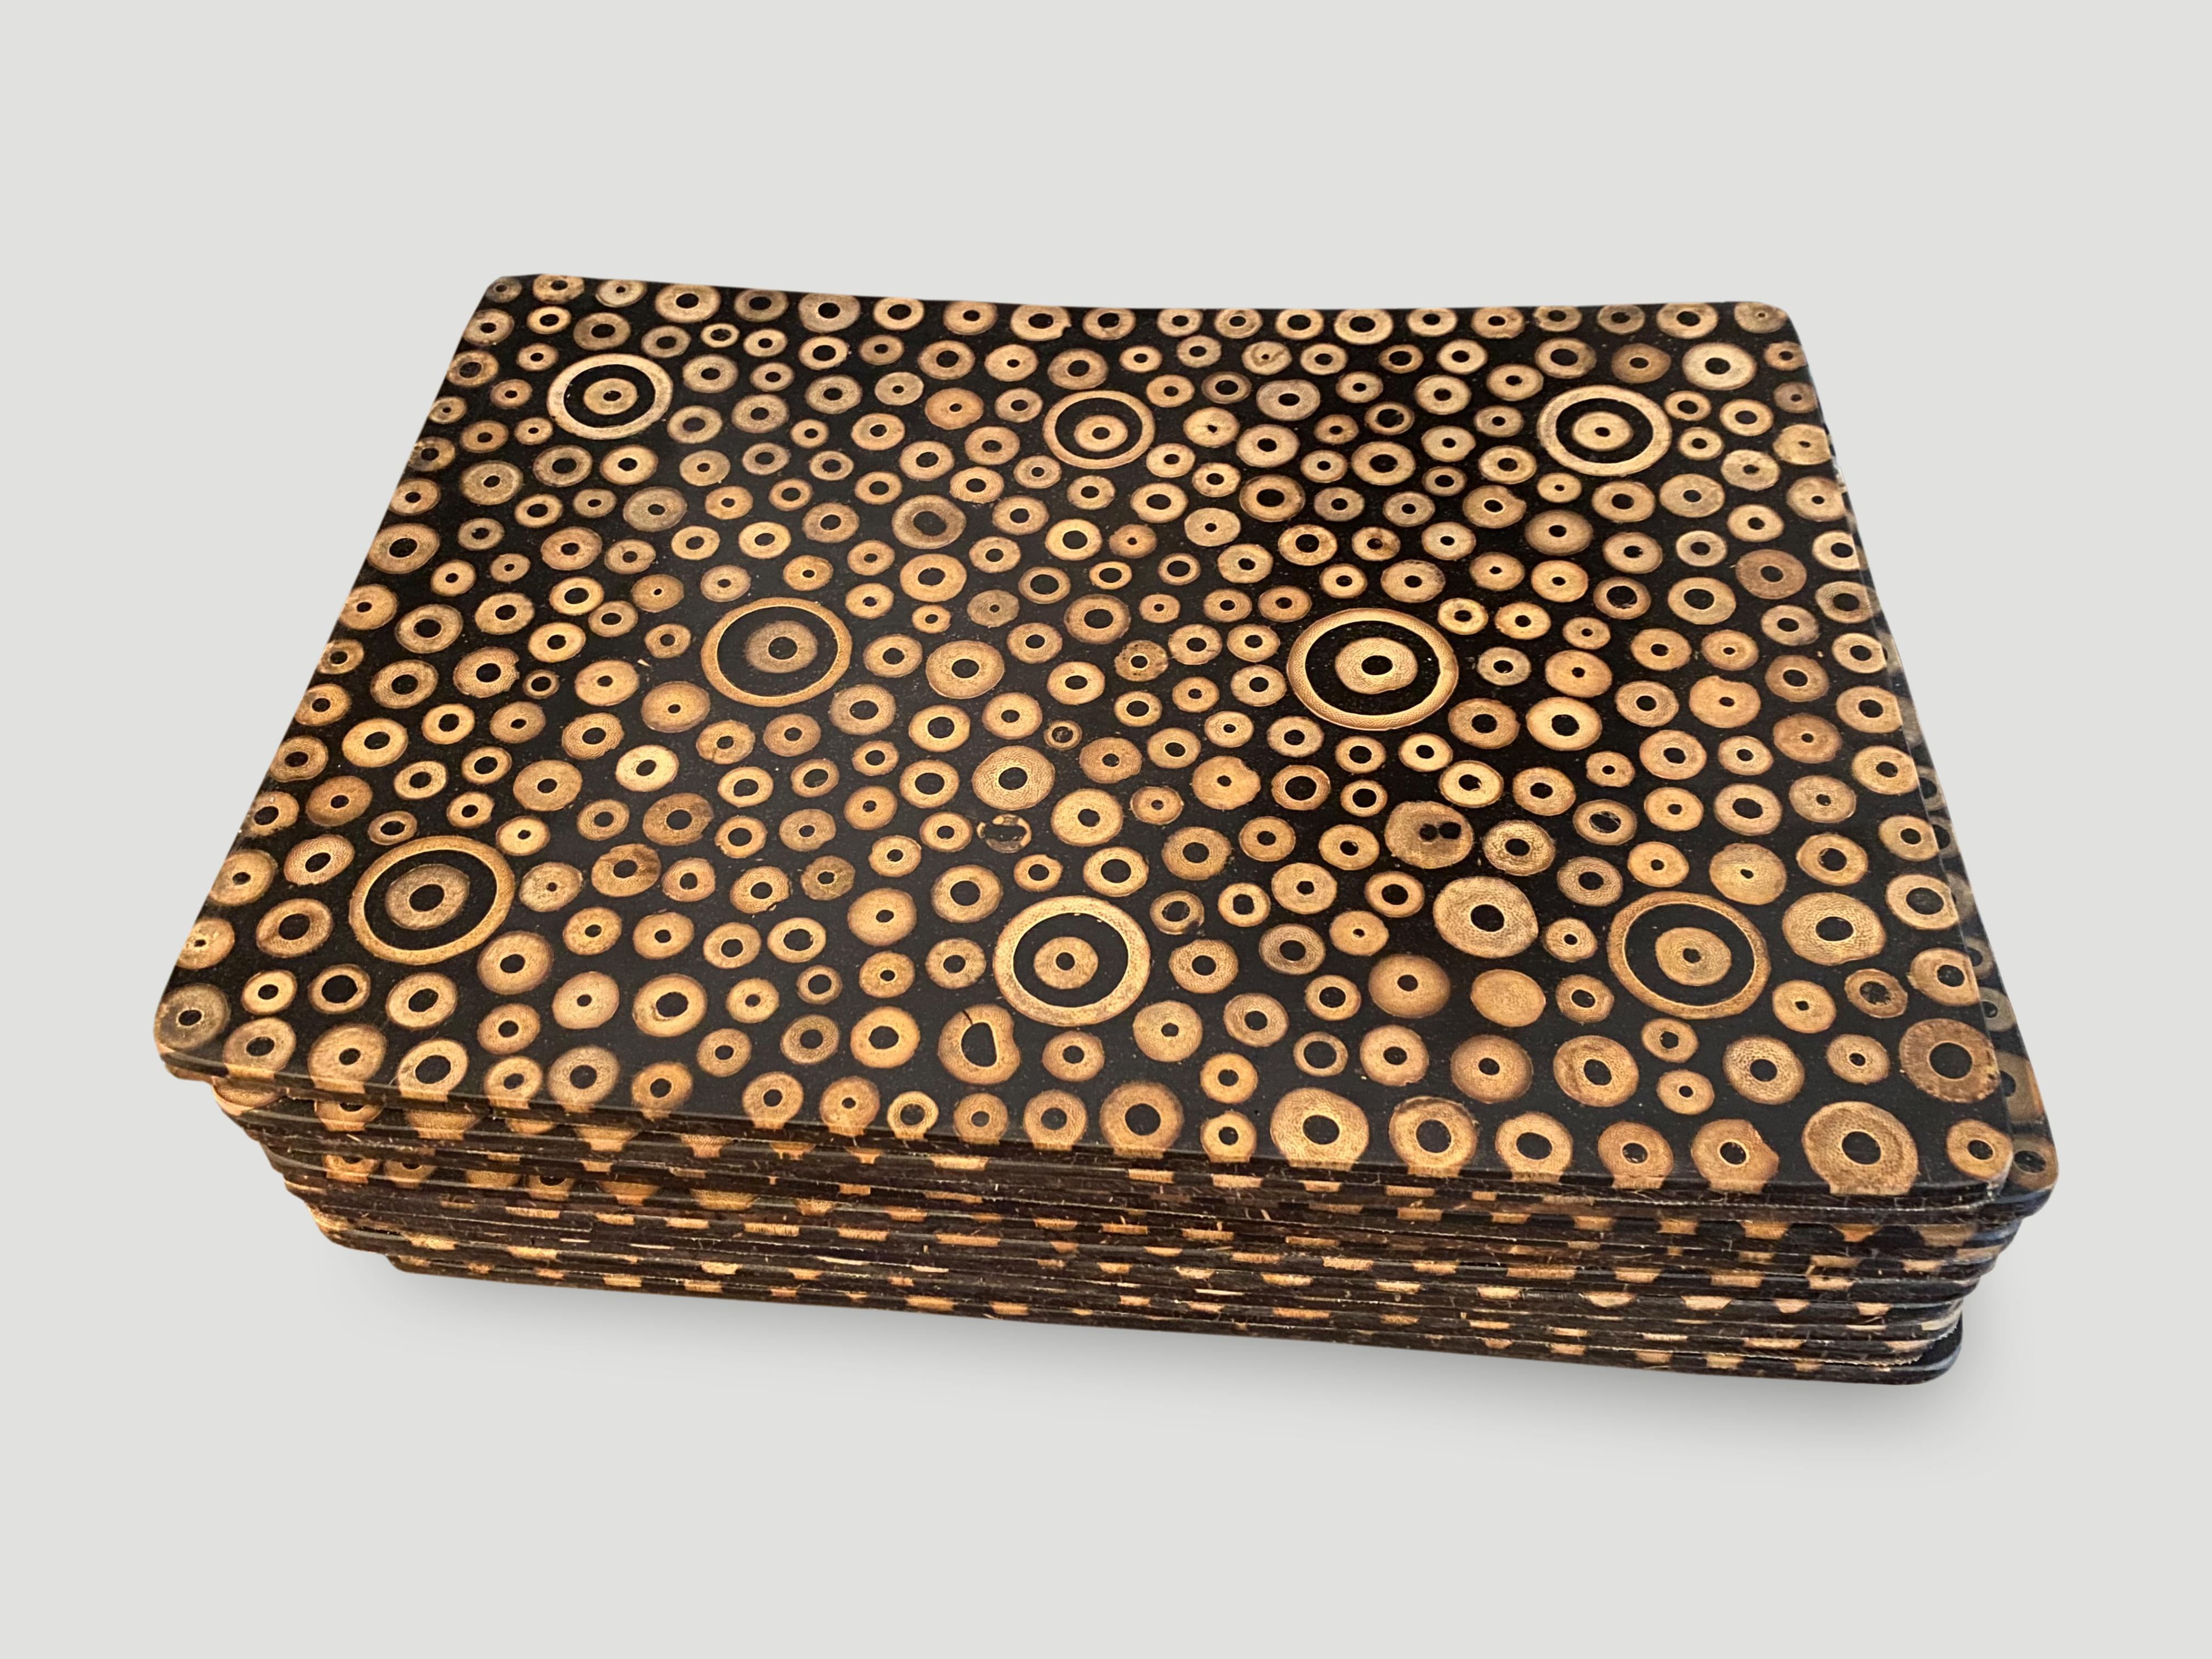 Espresso resin with sliced bamboo inlaid placemats.

Unique fusion of modern and natural elements. Each natural bamboo slice is carefully inlayed into the resin, which is stained black to create a sleek, modern aesthetic. This design is featured